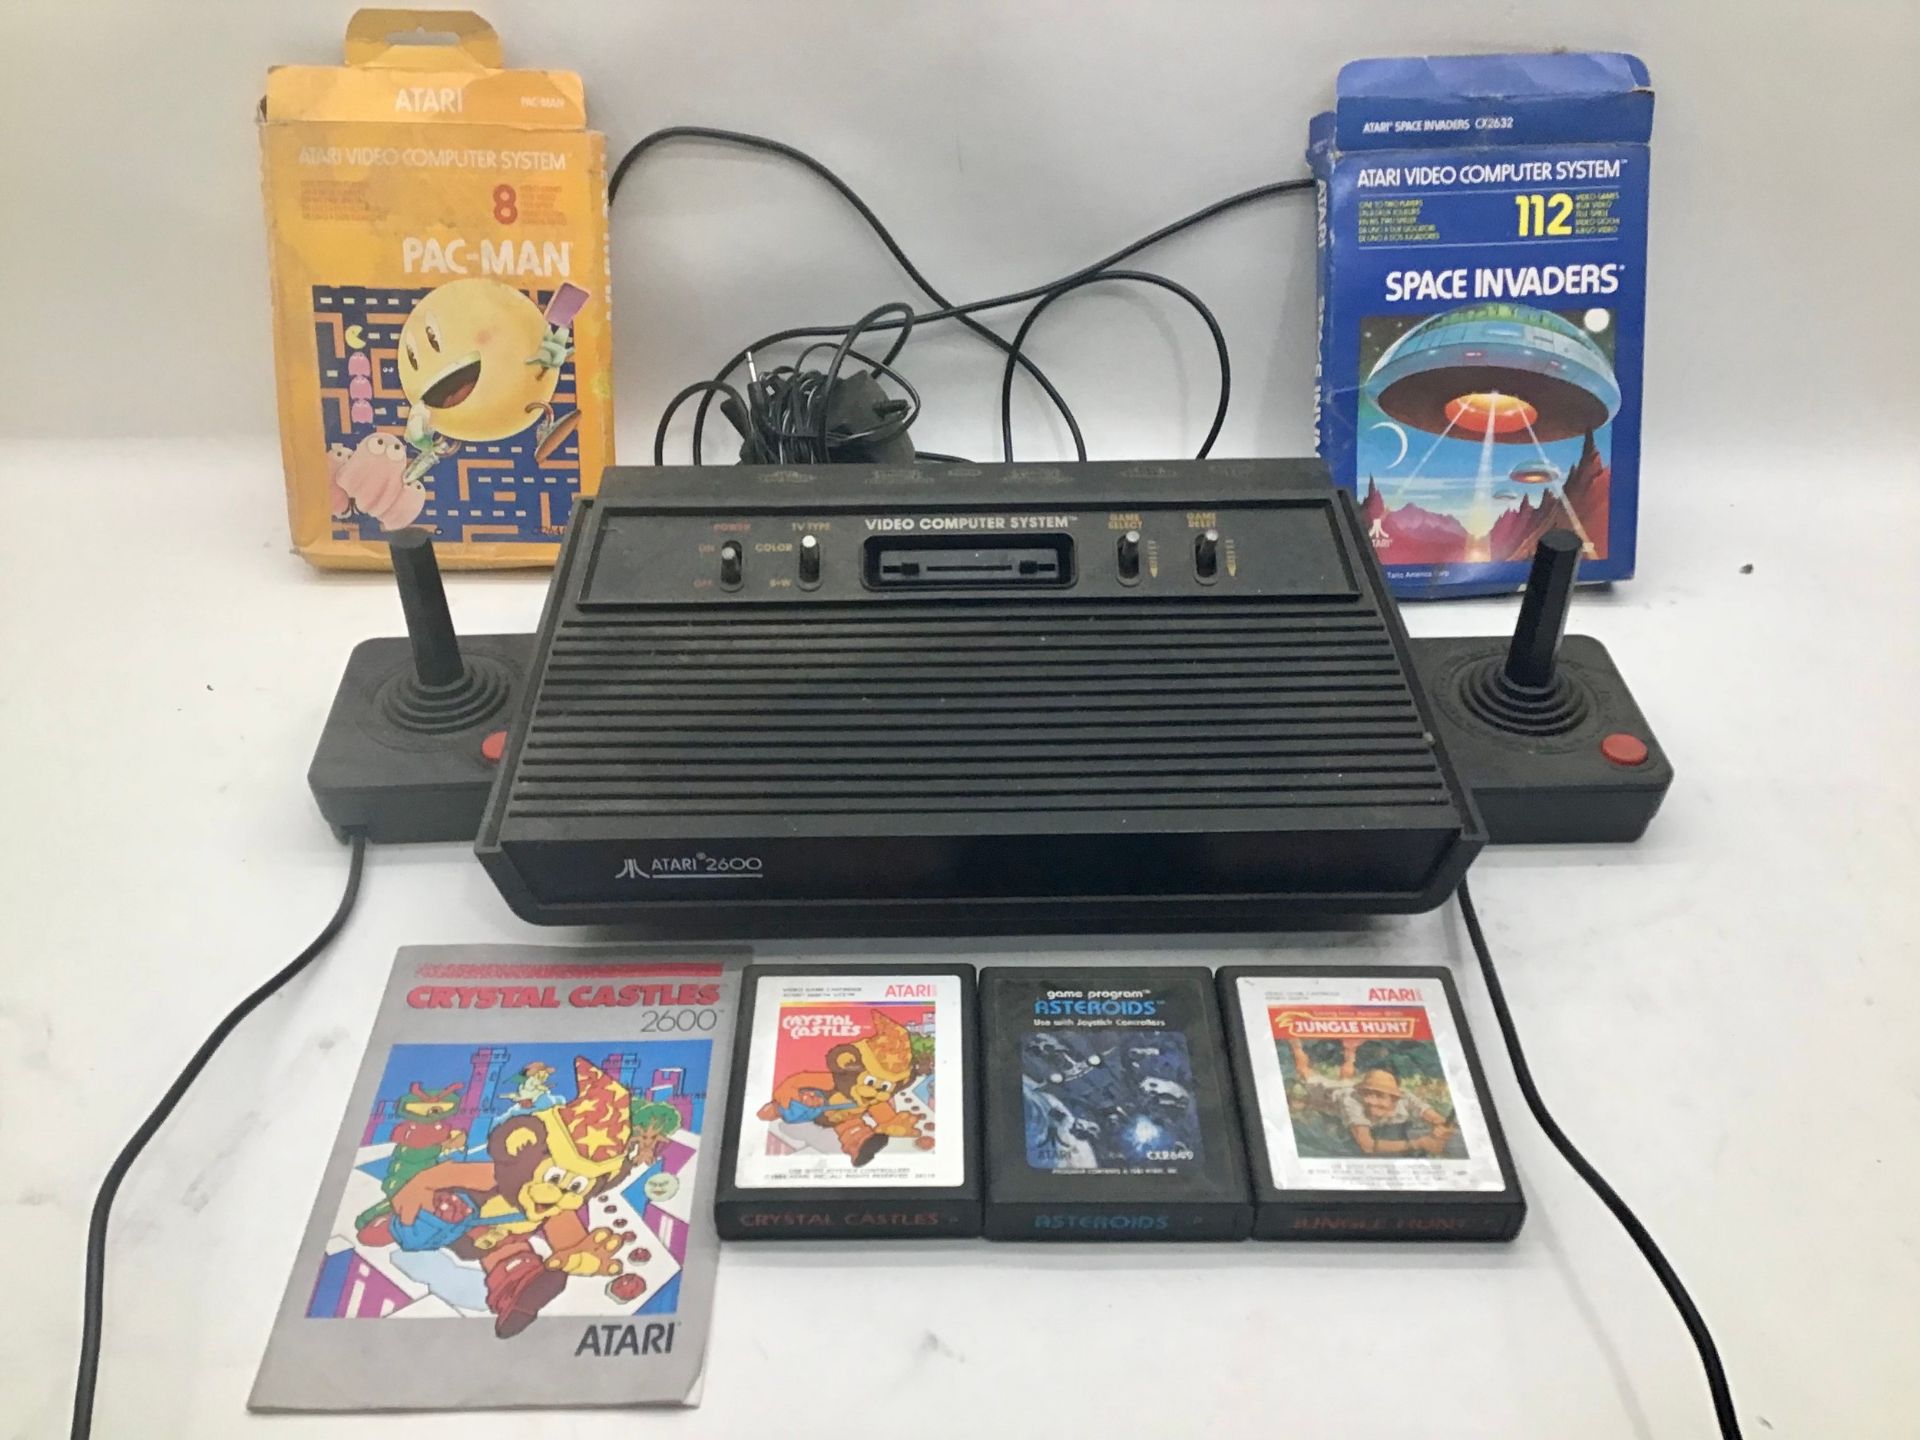 ATARI VIDEO GAME SYSTEM. This is model number 2600 and comes with power supply, 2 joysticks and 5